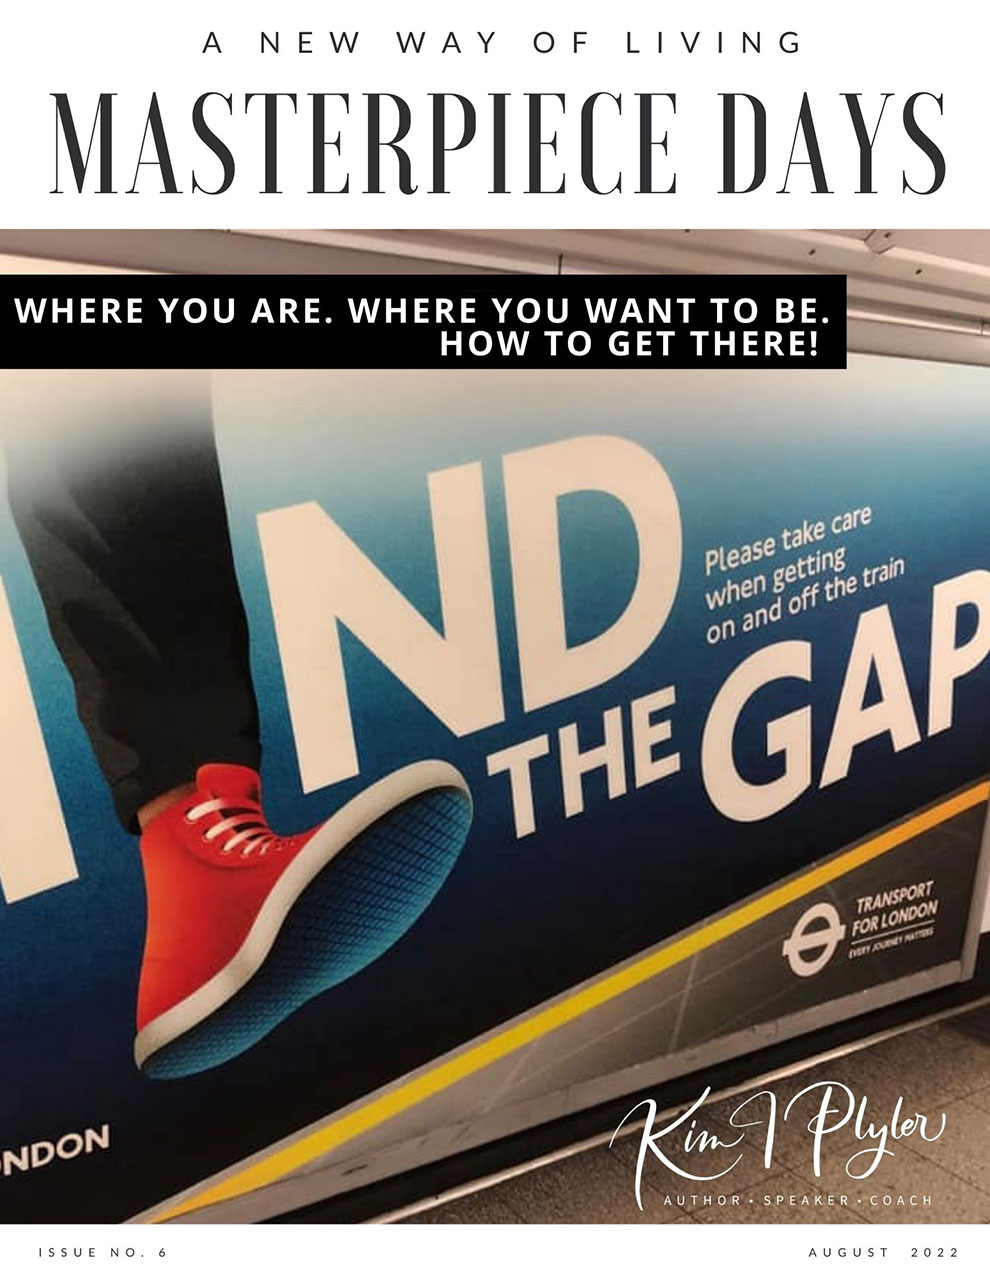 Masterpiece Days Magazine Cover, Volume 6: Where You Are. Where You Want To Be. How To Get There!